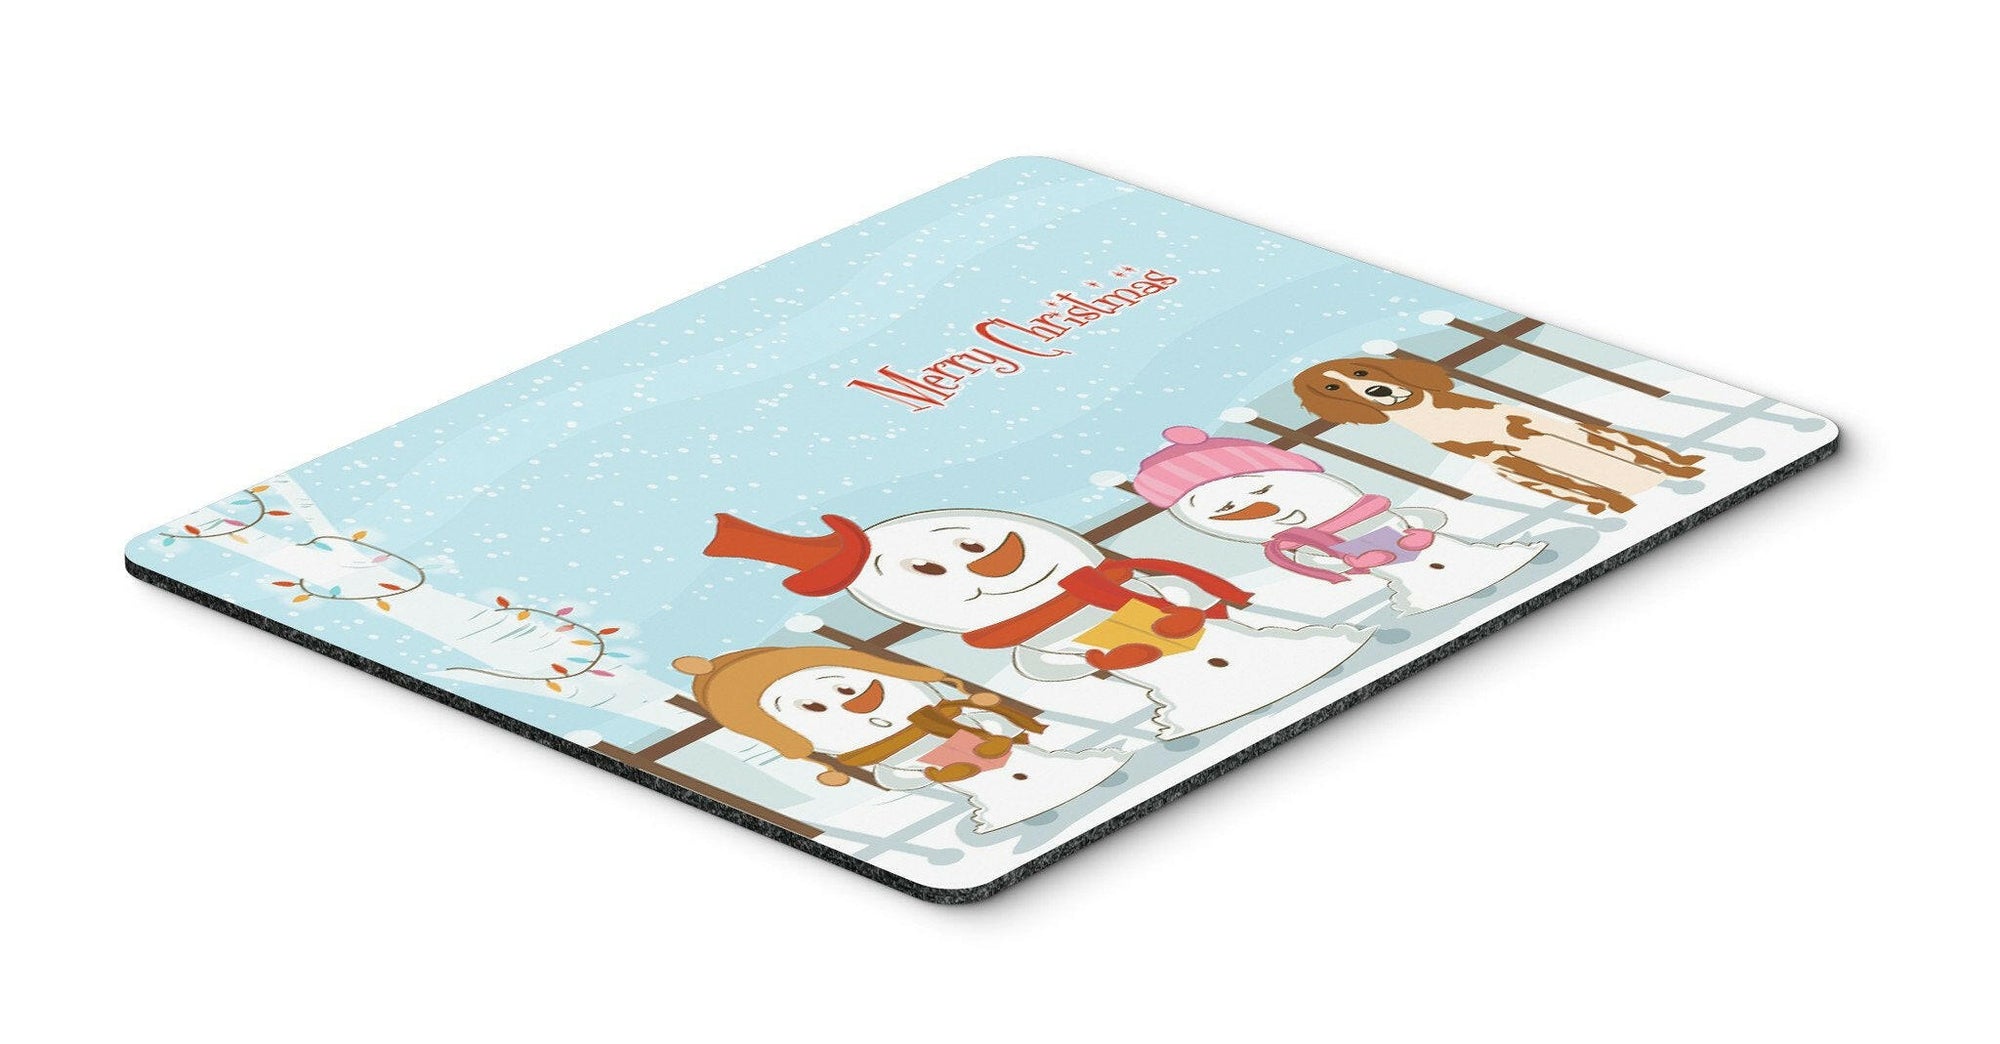 Merry Christmas Carolers Brittany Spaniel Mouse Pad, Hot Pad or Trivet BB2403MP by Caroline's Treasures